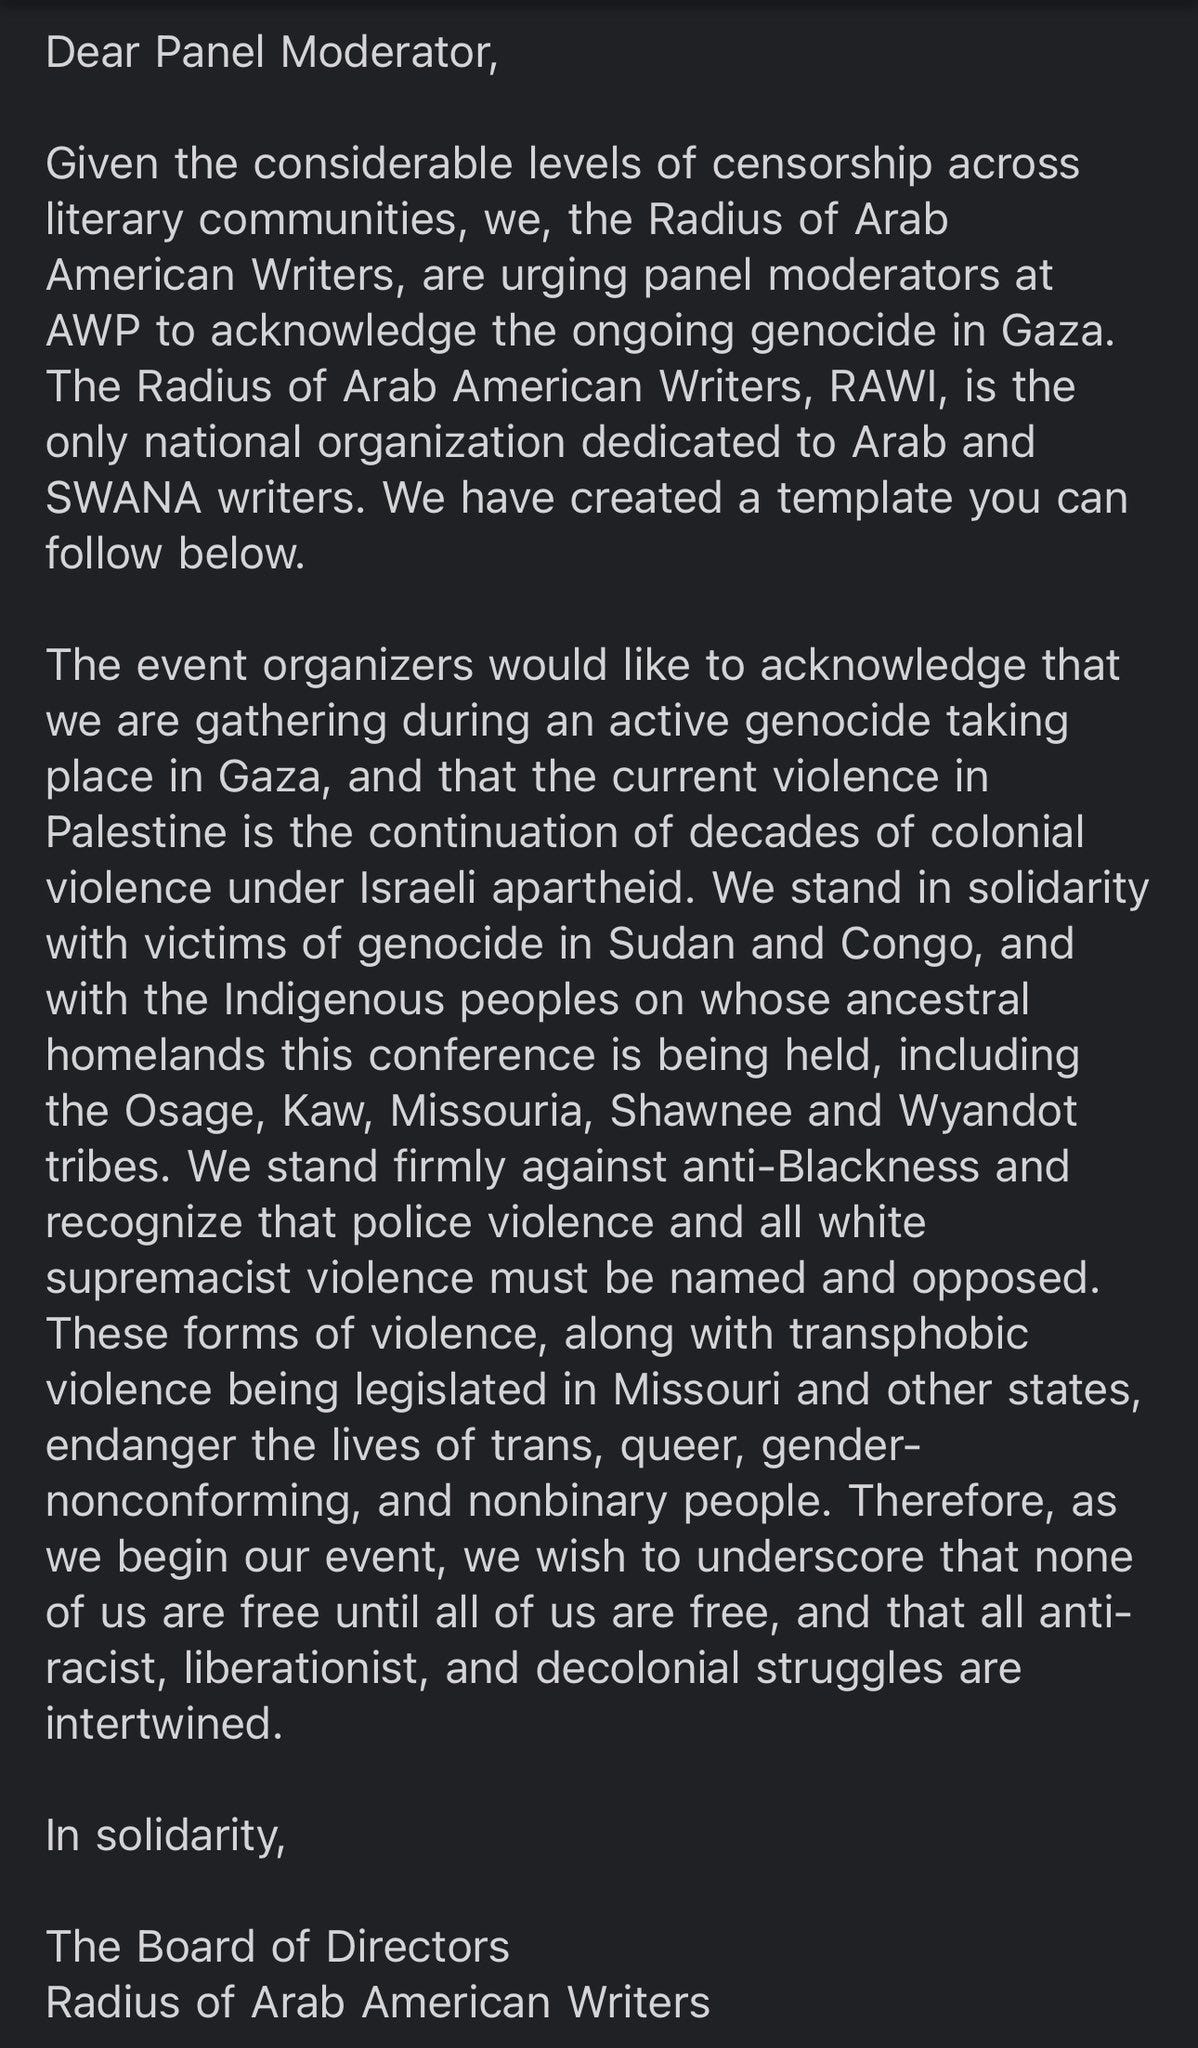 A letter encouraging panel moderators to read a statement calling the war in Gaza genocide, Israel an apartheid state, etc. The text is longer than alt text will allow me to put here, and I'm not finding a good source for the full text that doesn't take readers to a page I would not want to support. 